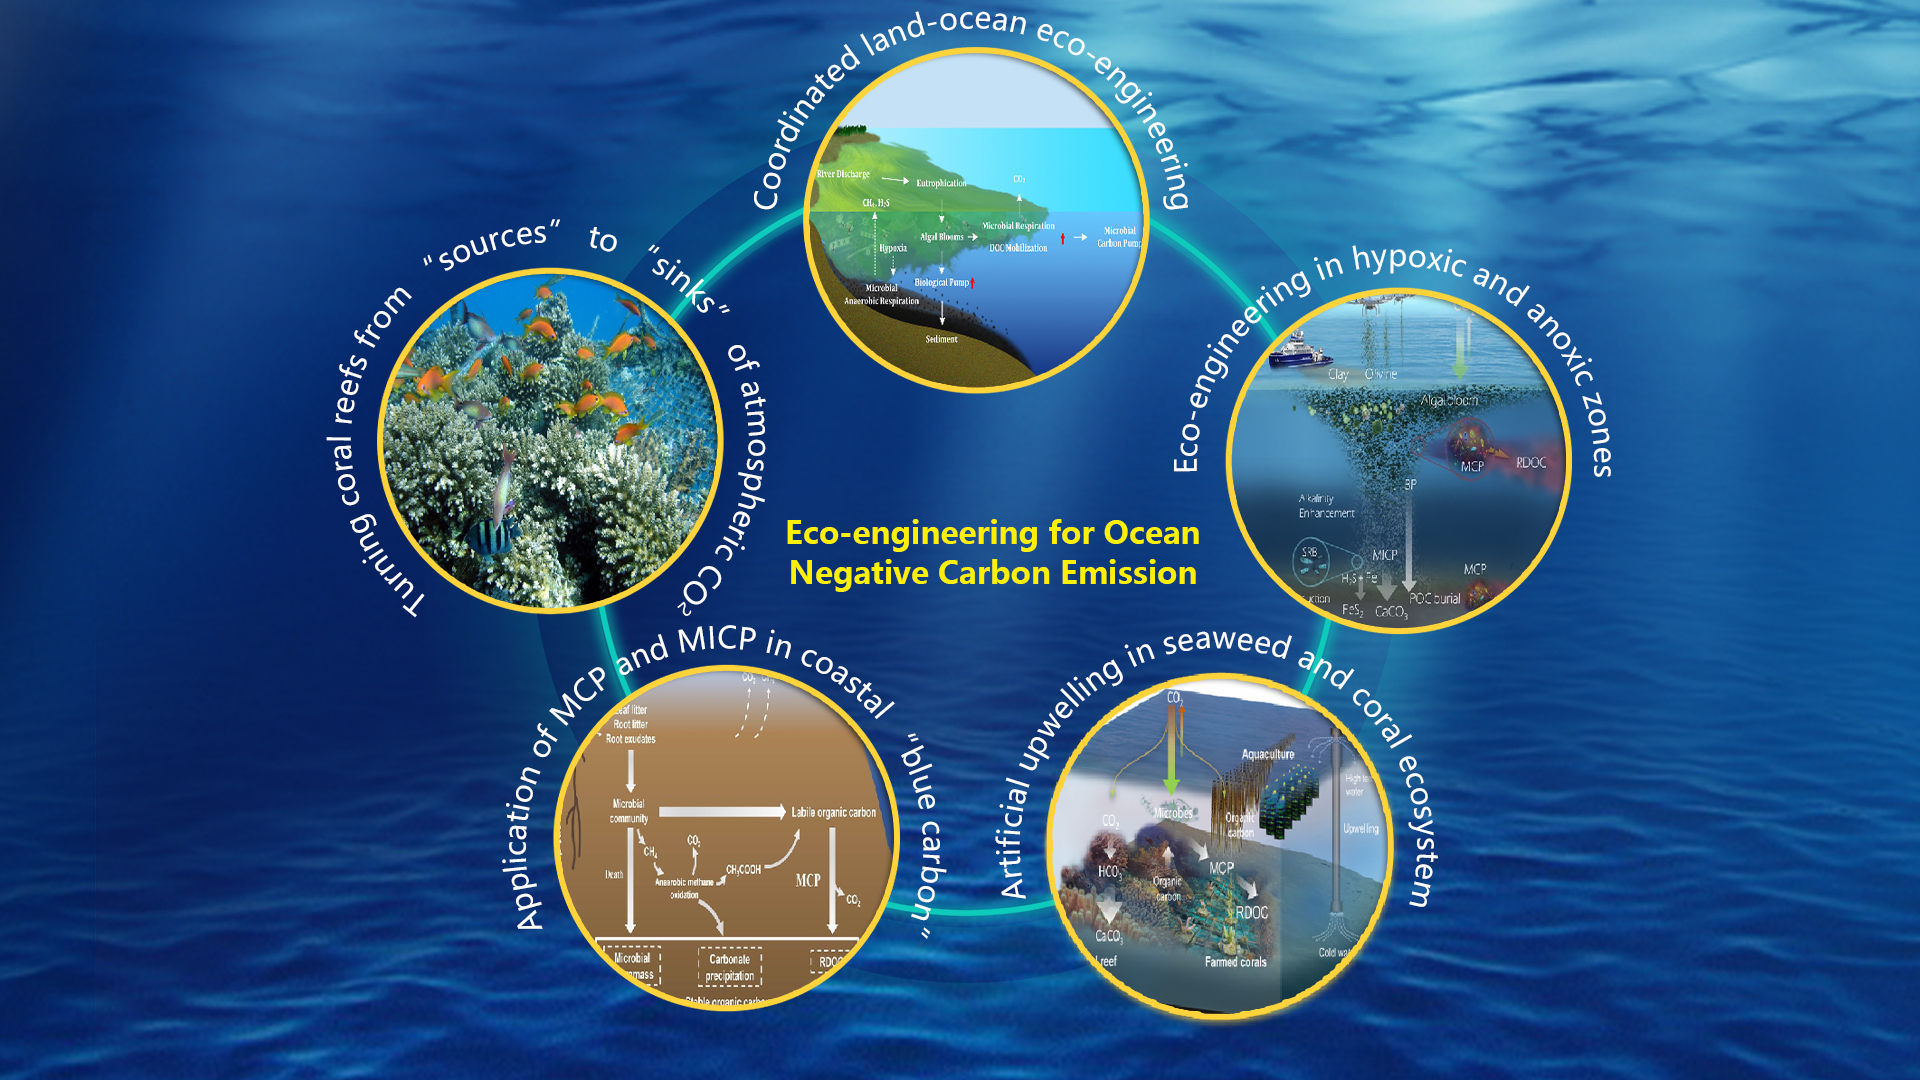 Researchers collaborate to advocate eco-engineering approaches for ocean negative carbon emission